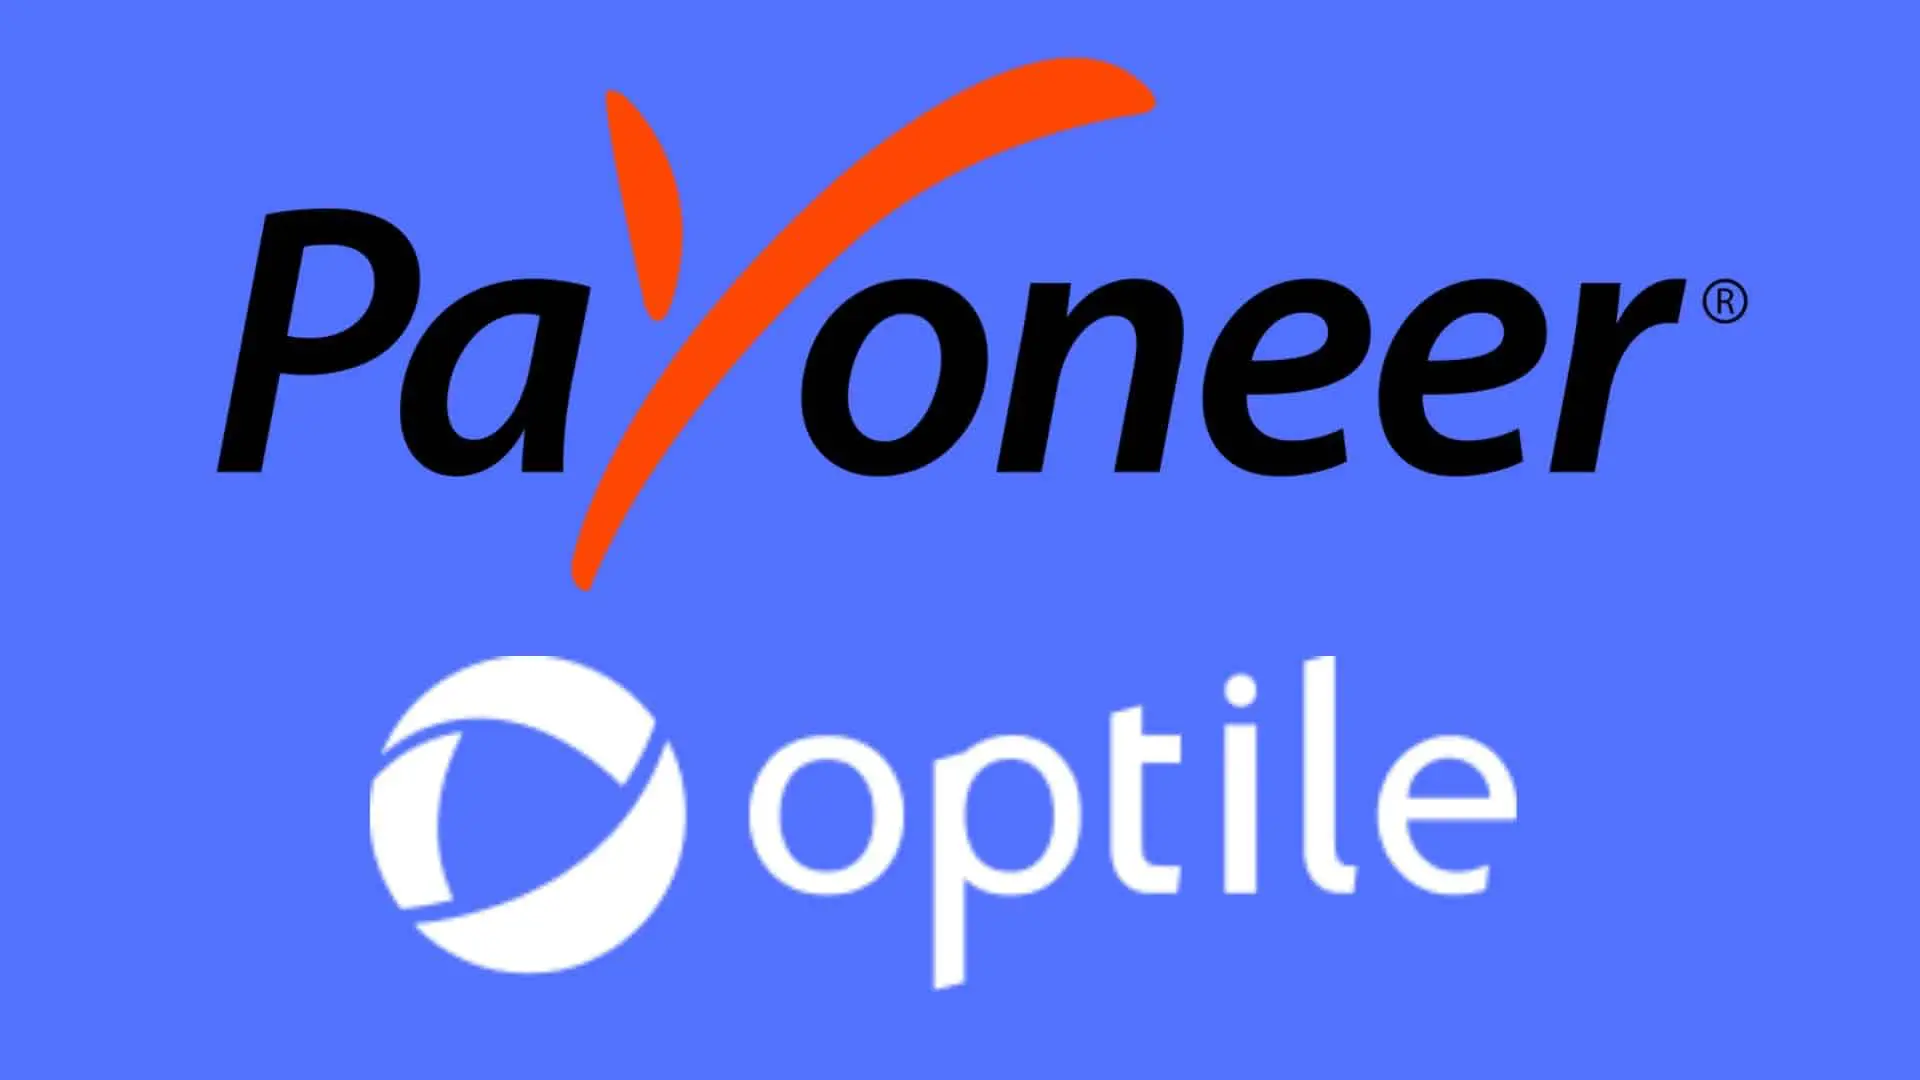 NYCs Payoneer Acquires optile To Bolster Payment Technology